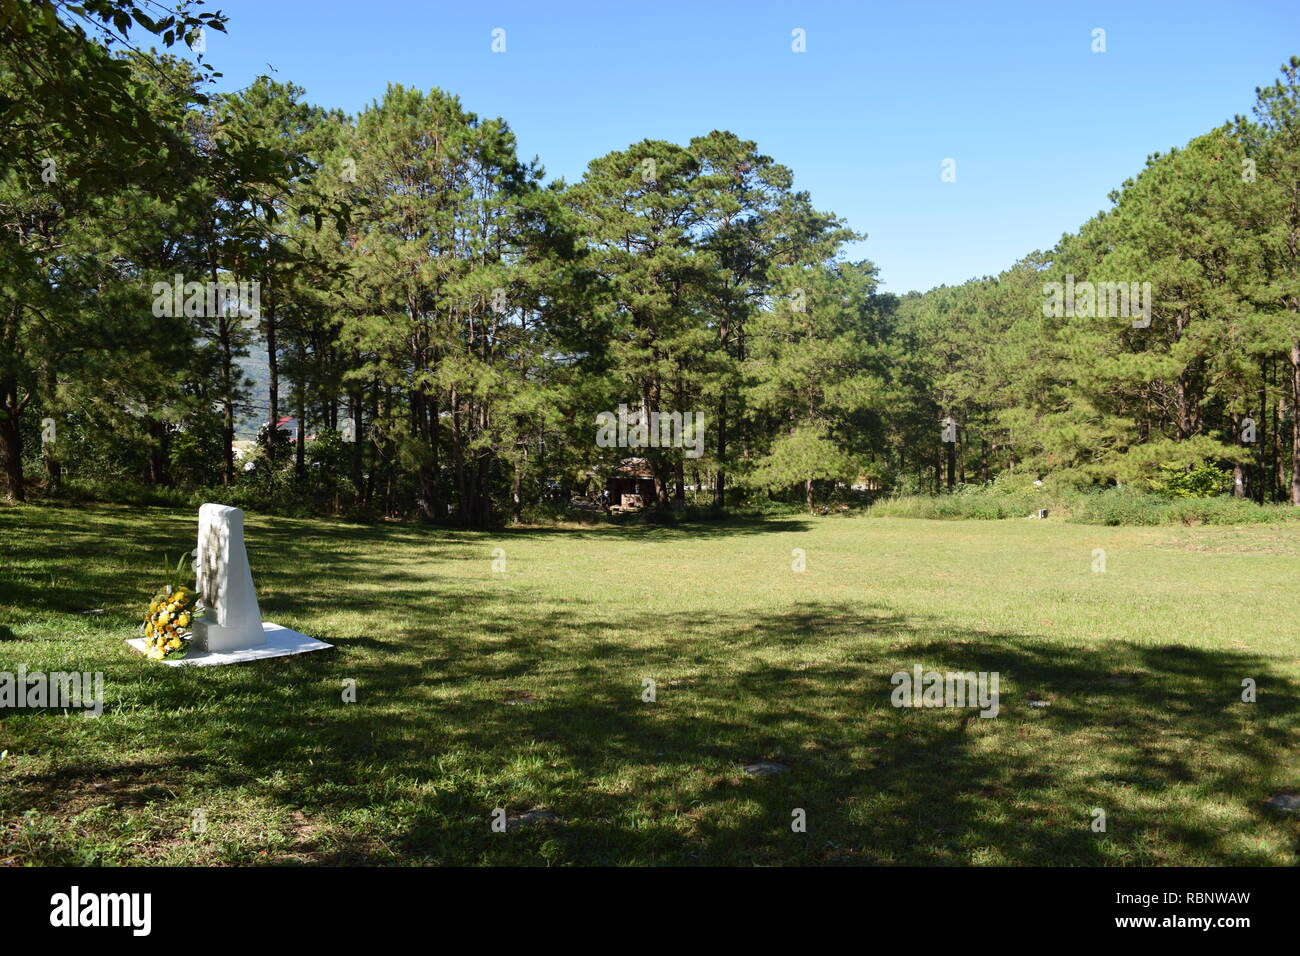 The 2nd.Phil-Am, Veterans Cemetery is the final resting place for military and civilian victims of foreign wars and lay embedded in the Camp John Hay Stock Photo